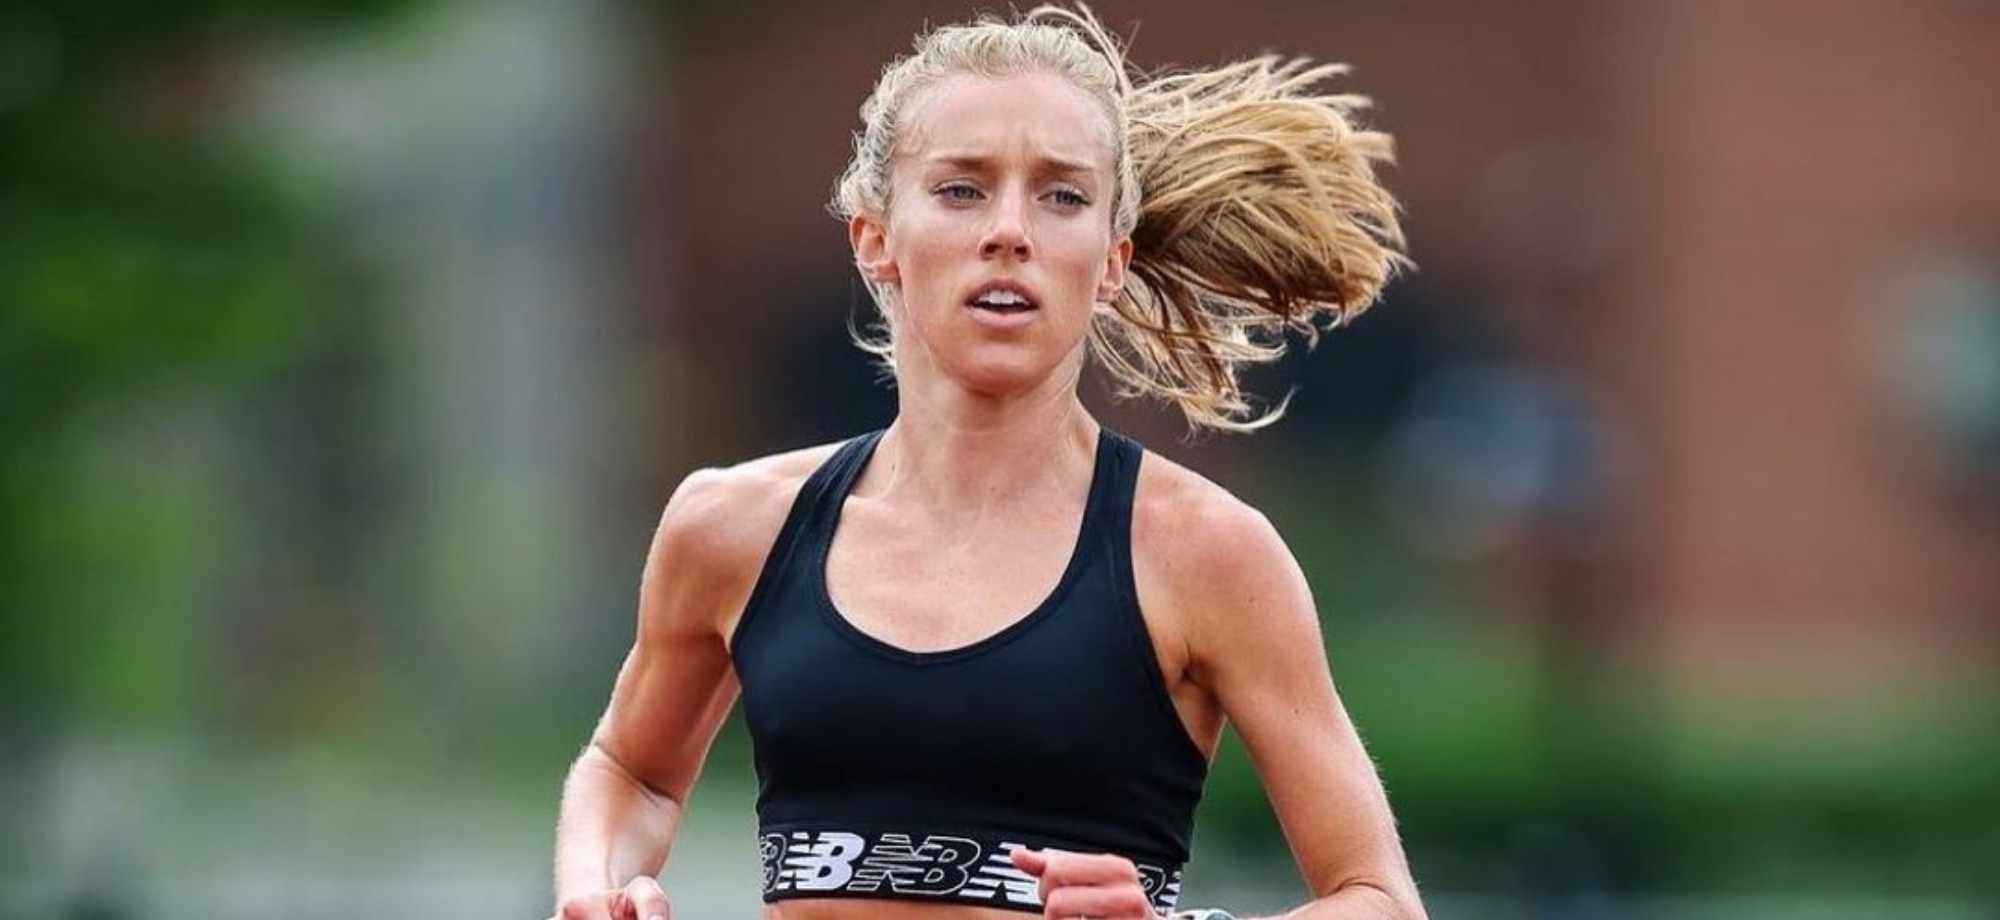 Olympian Emily Sisson on Going the Distance